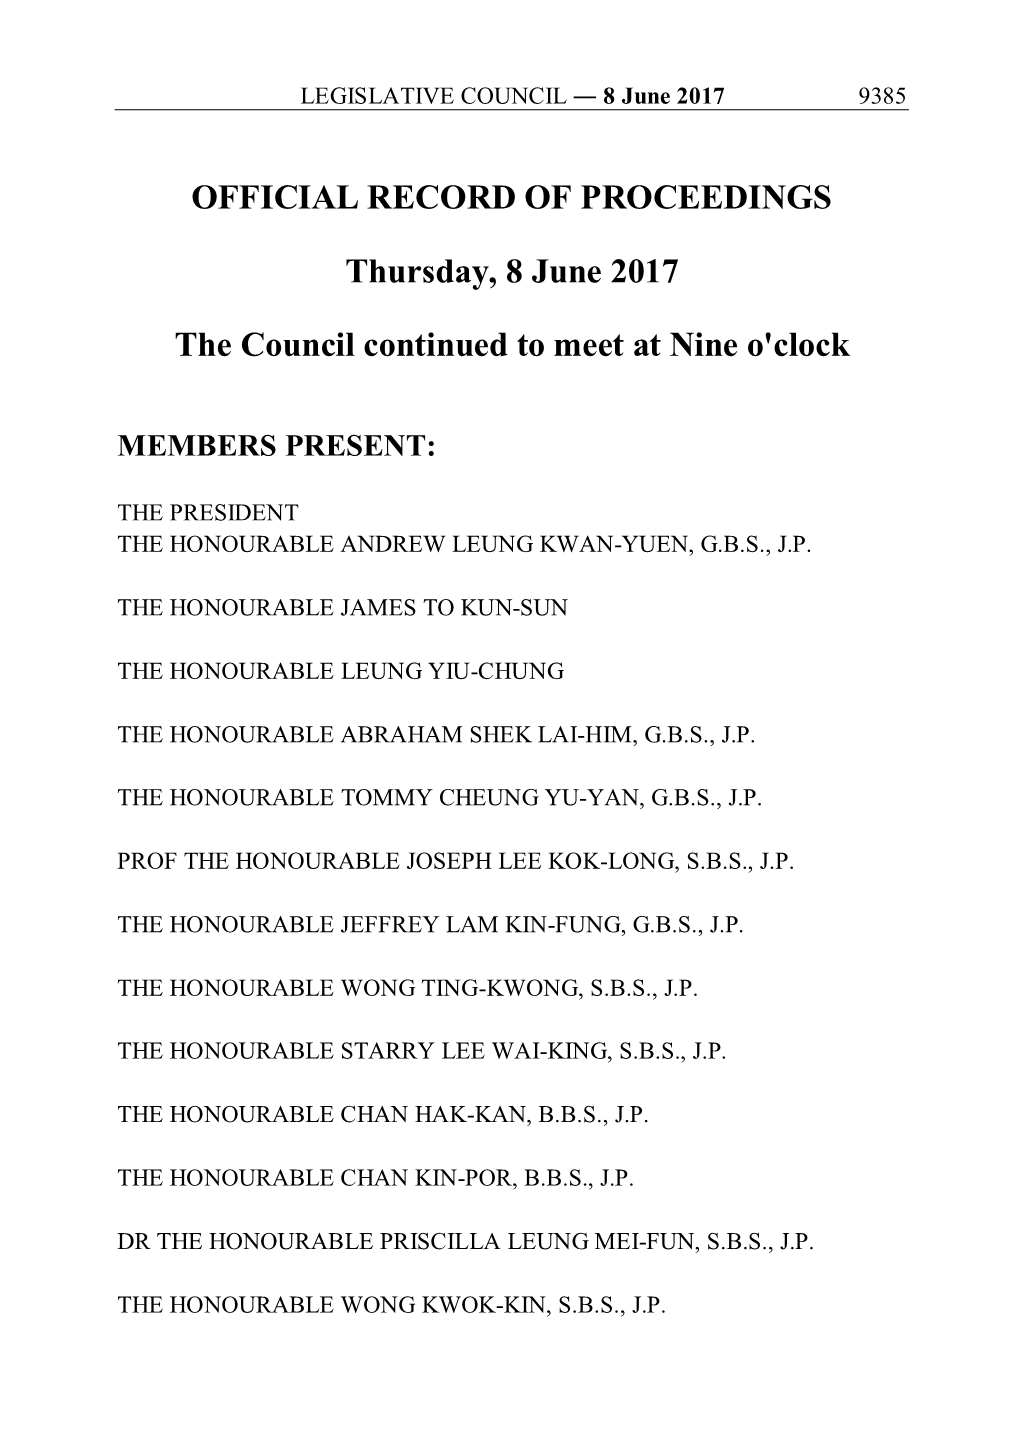 OFFICIAL RECORD of PROCEEDINGS Thursday, 8 June